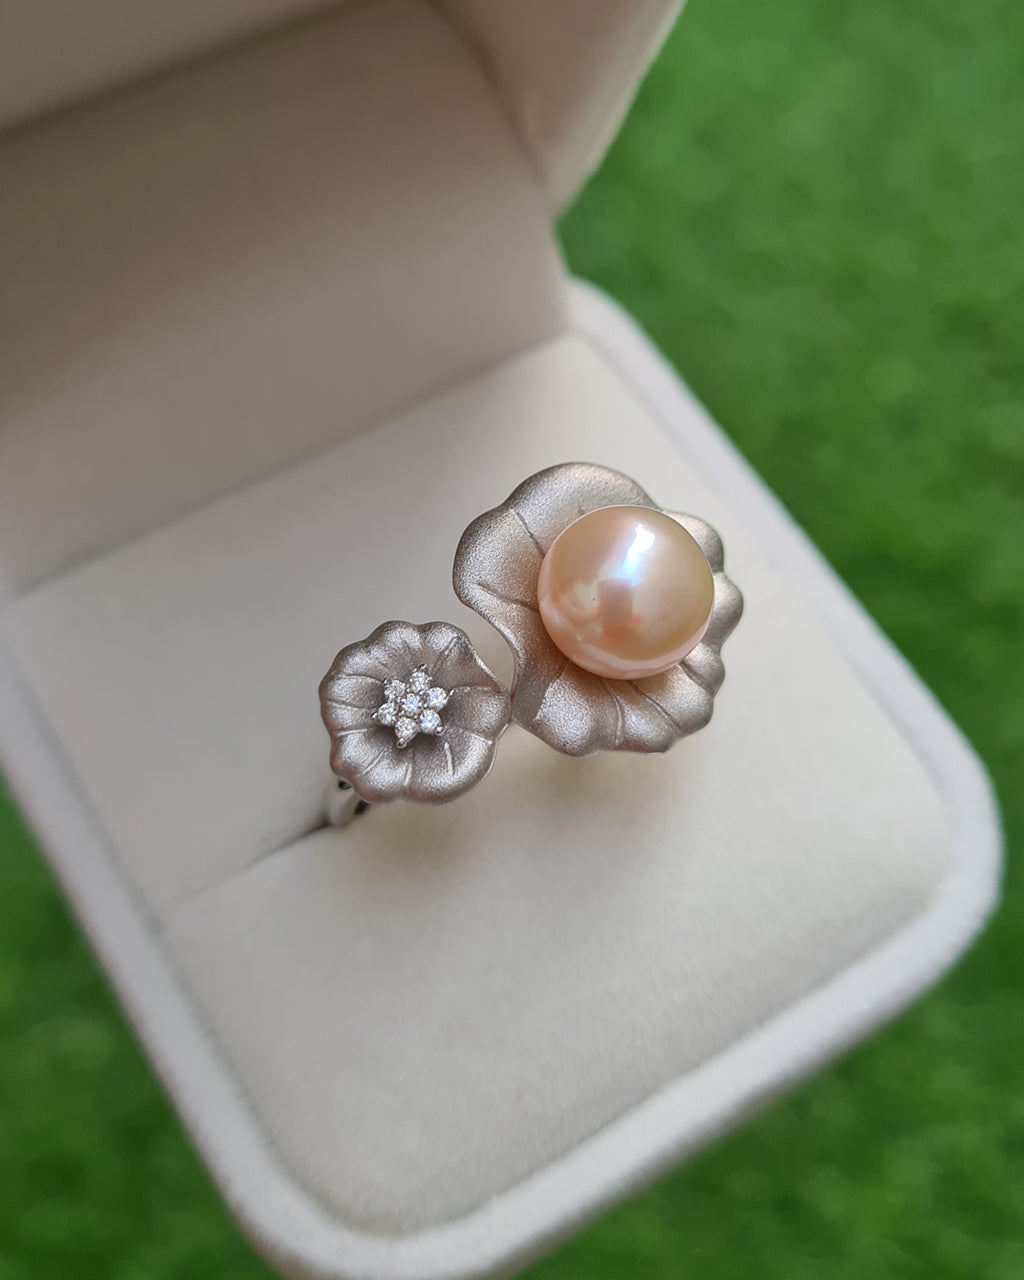 Double Flower White Pearl Open Ring with Floral Elegance - Water Poppy | Statement Cocktail Ring